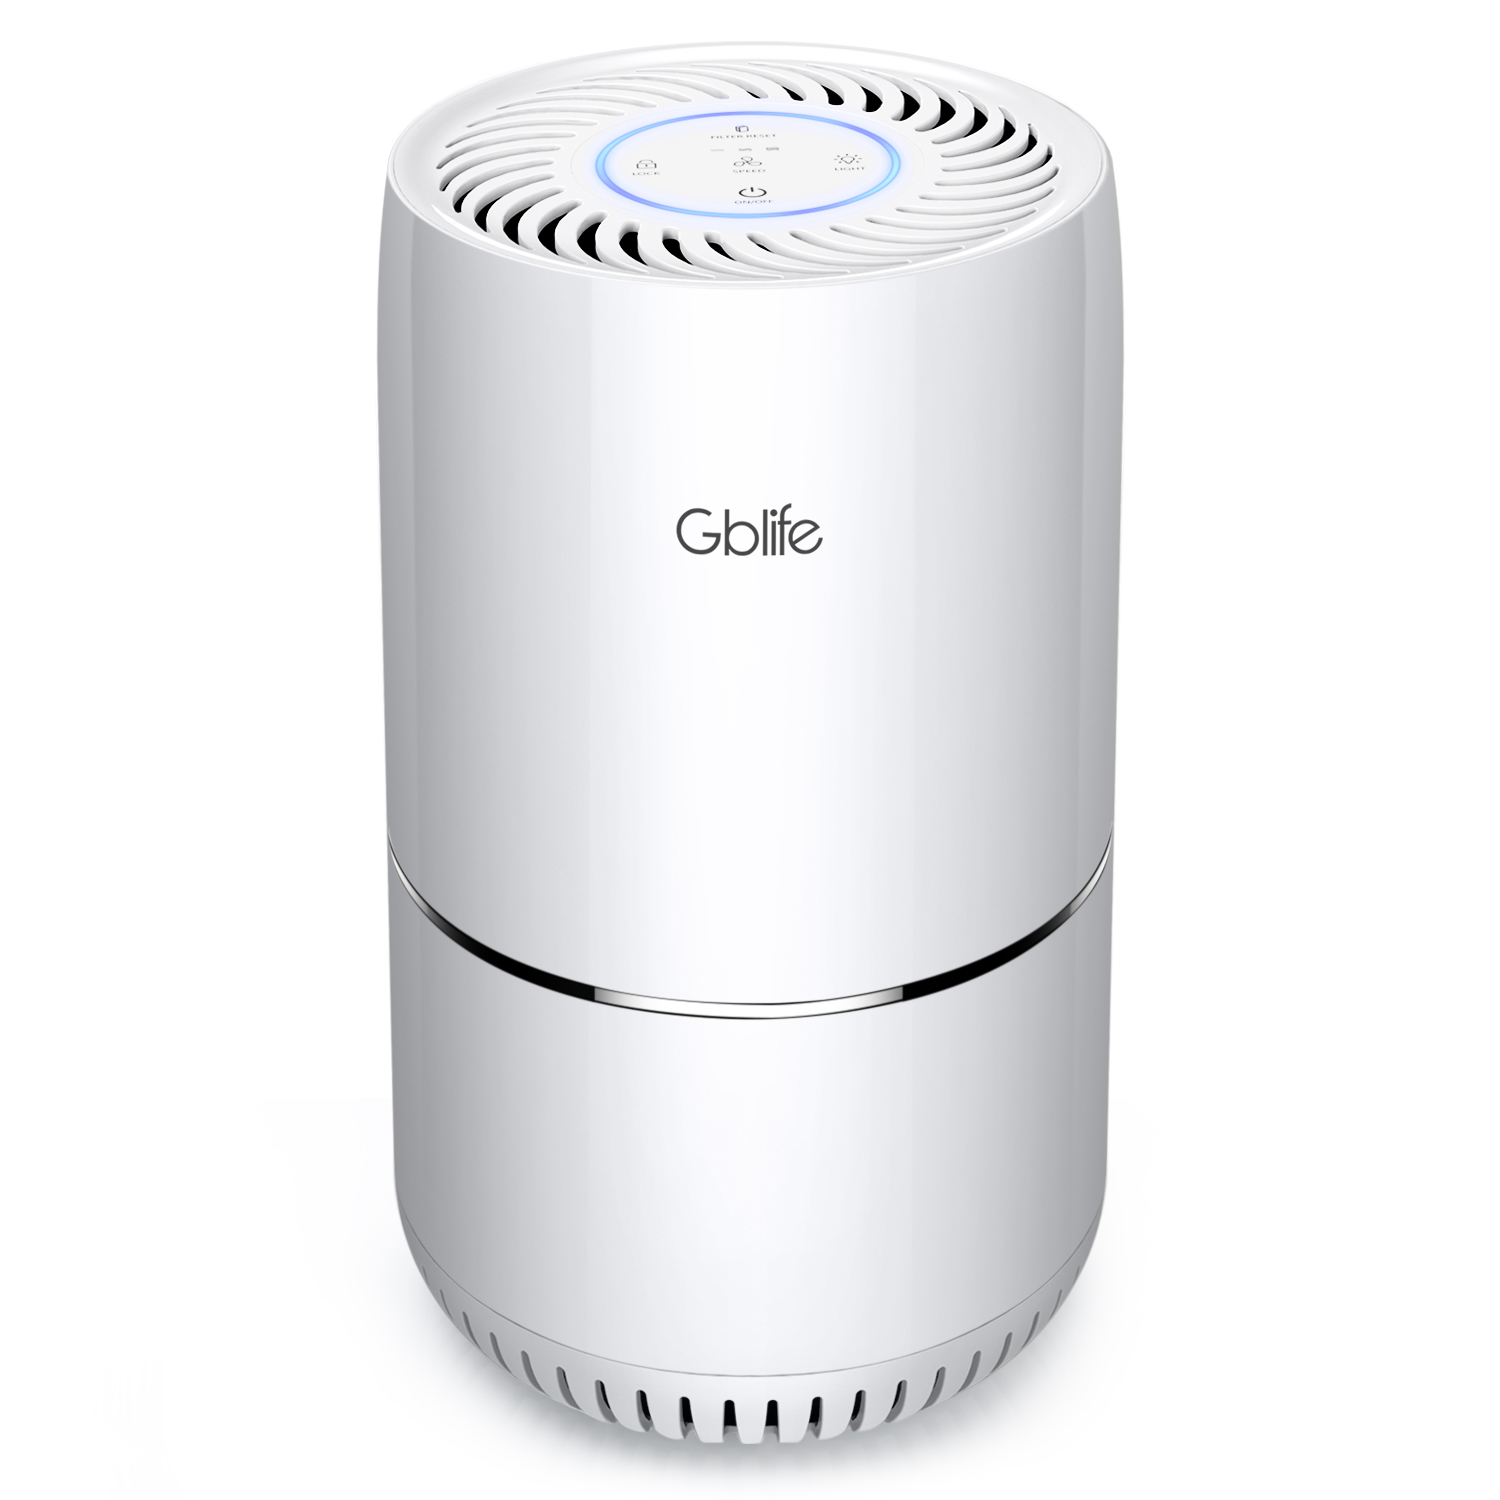 GBlife 3-in-1 Air Purifier with True Hepa Filter, Captures Allergens, Smoke, Odors, Mold, Dust 